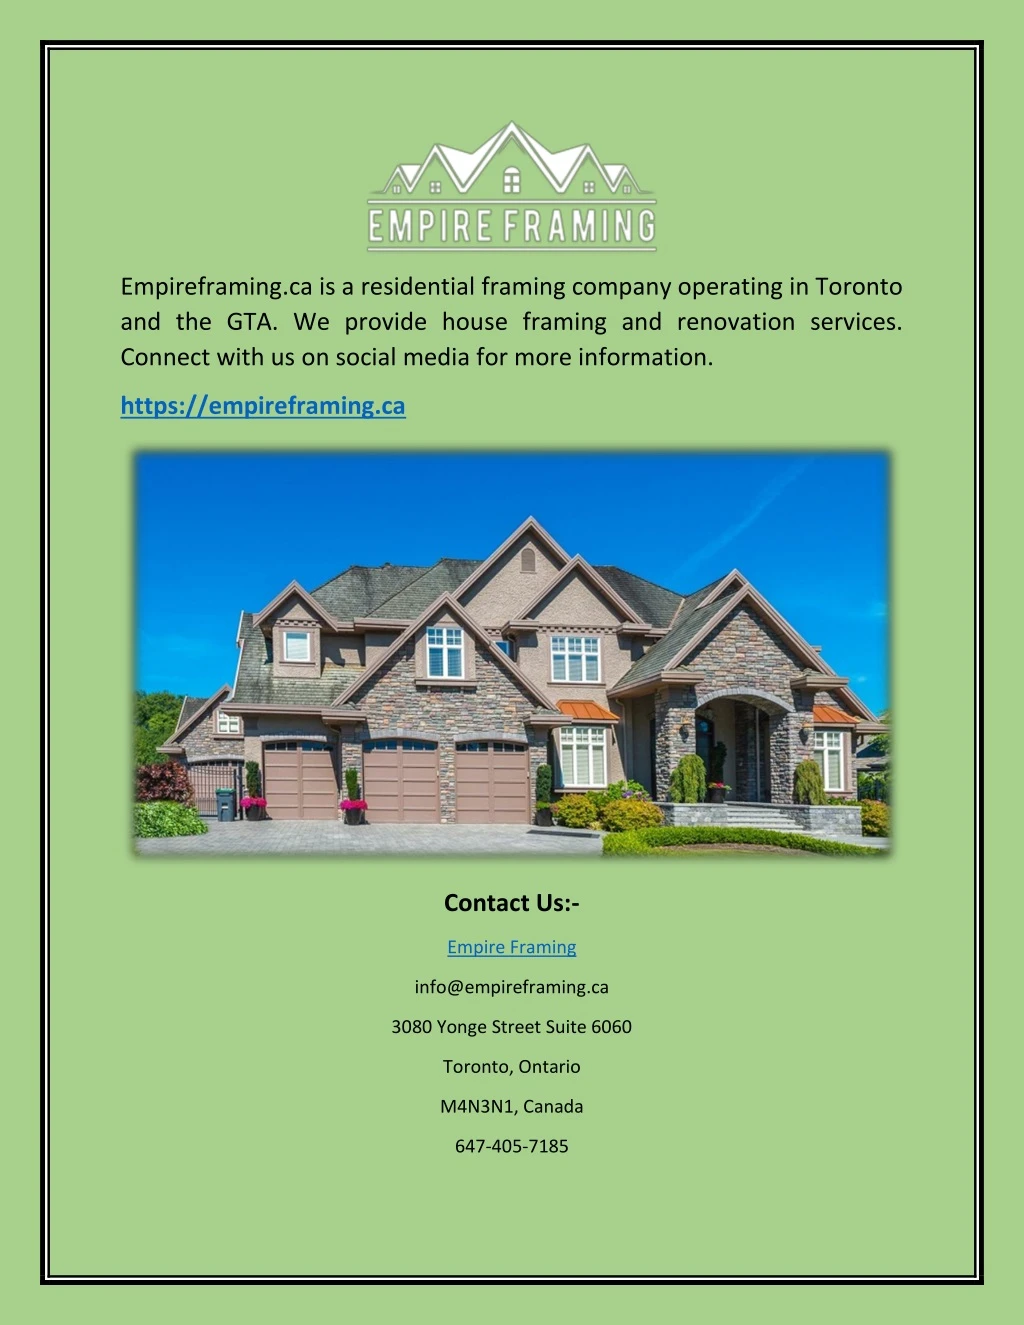 empireframing ca is a residential framing company